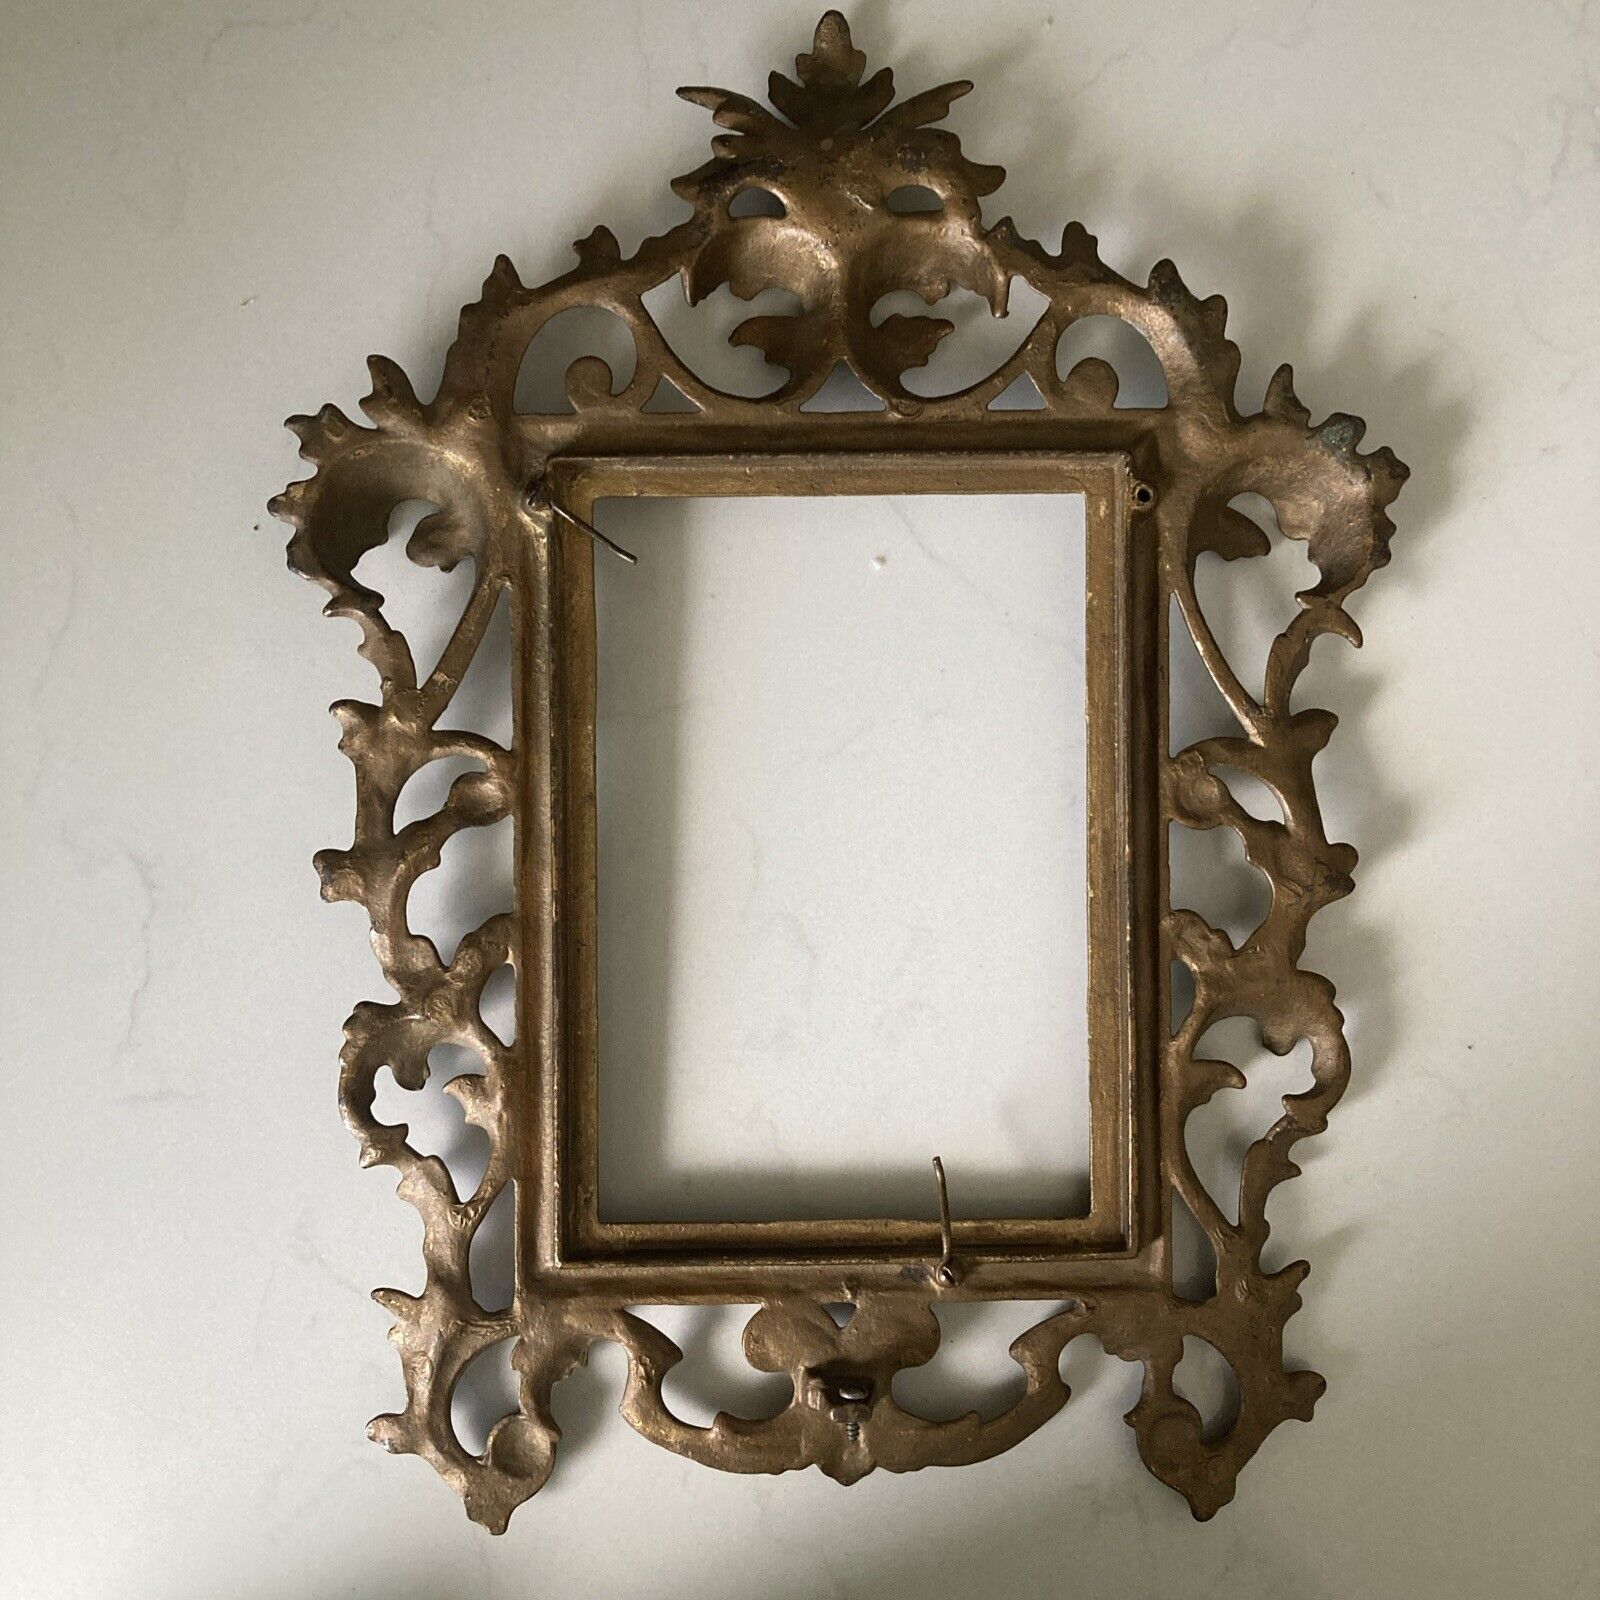 Antique Ornate Cast Iron Picture Frame Gilt Wall Hanging 9” x 12”